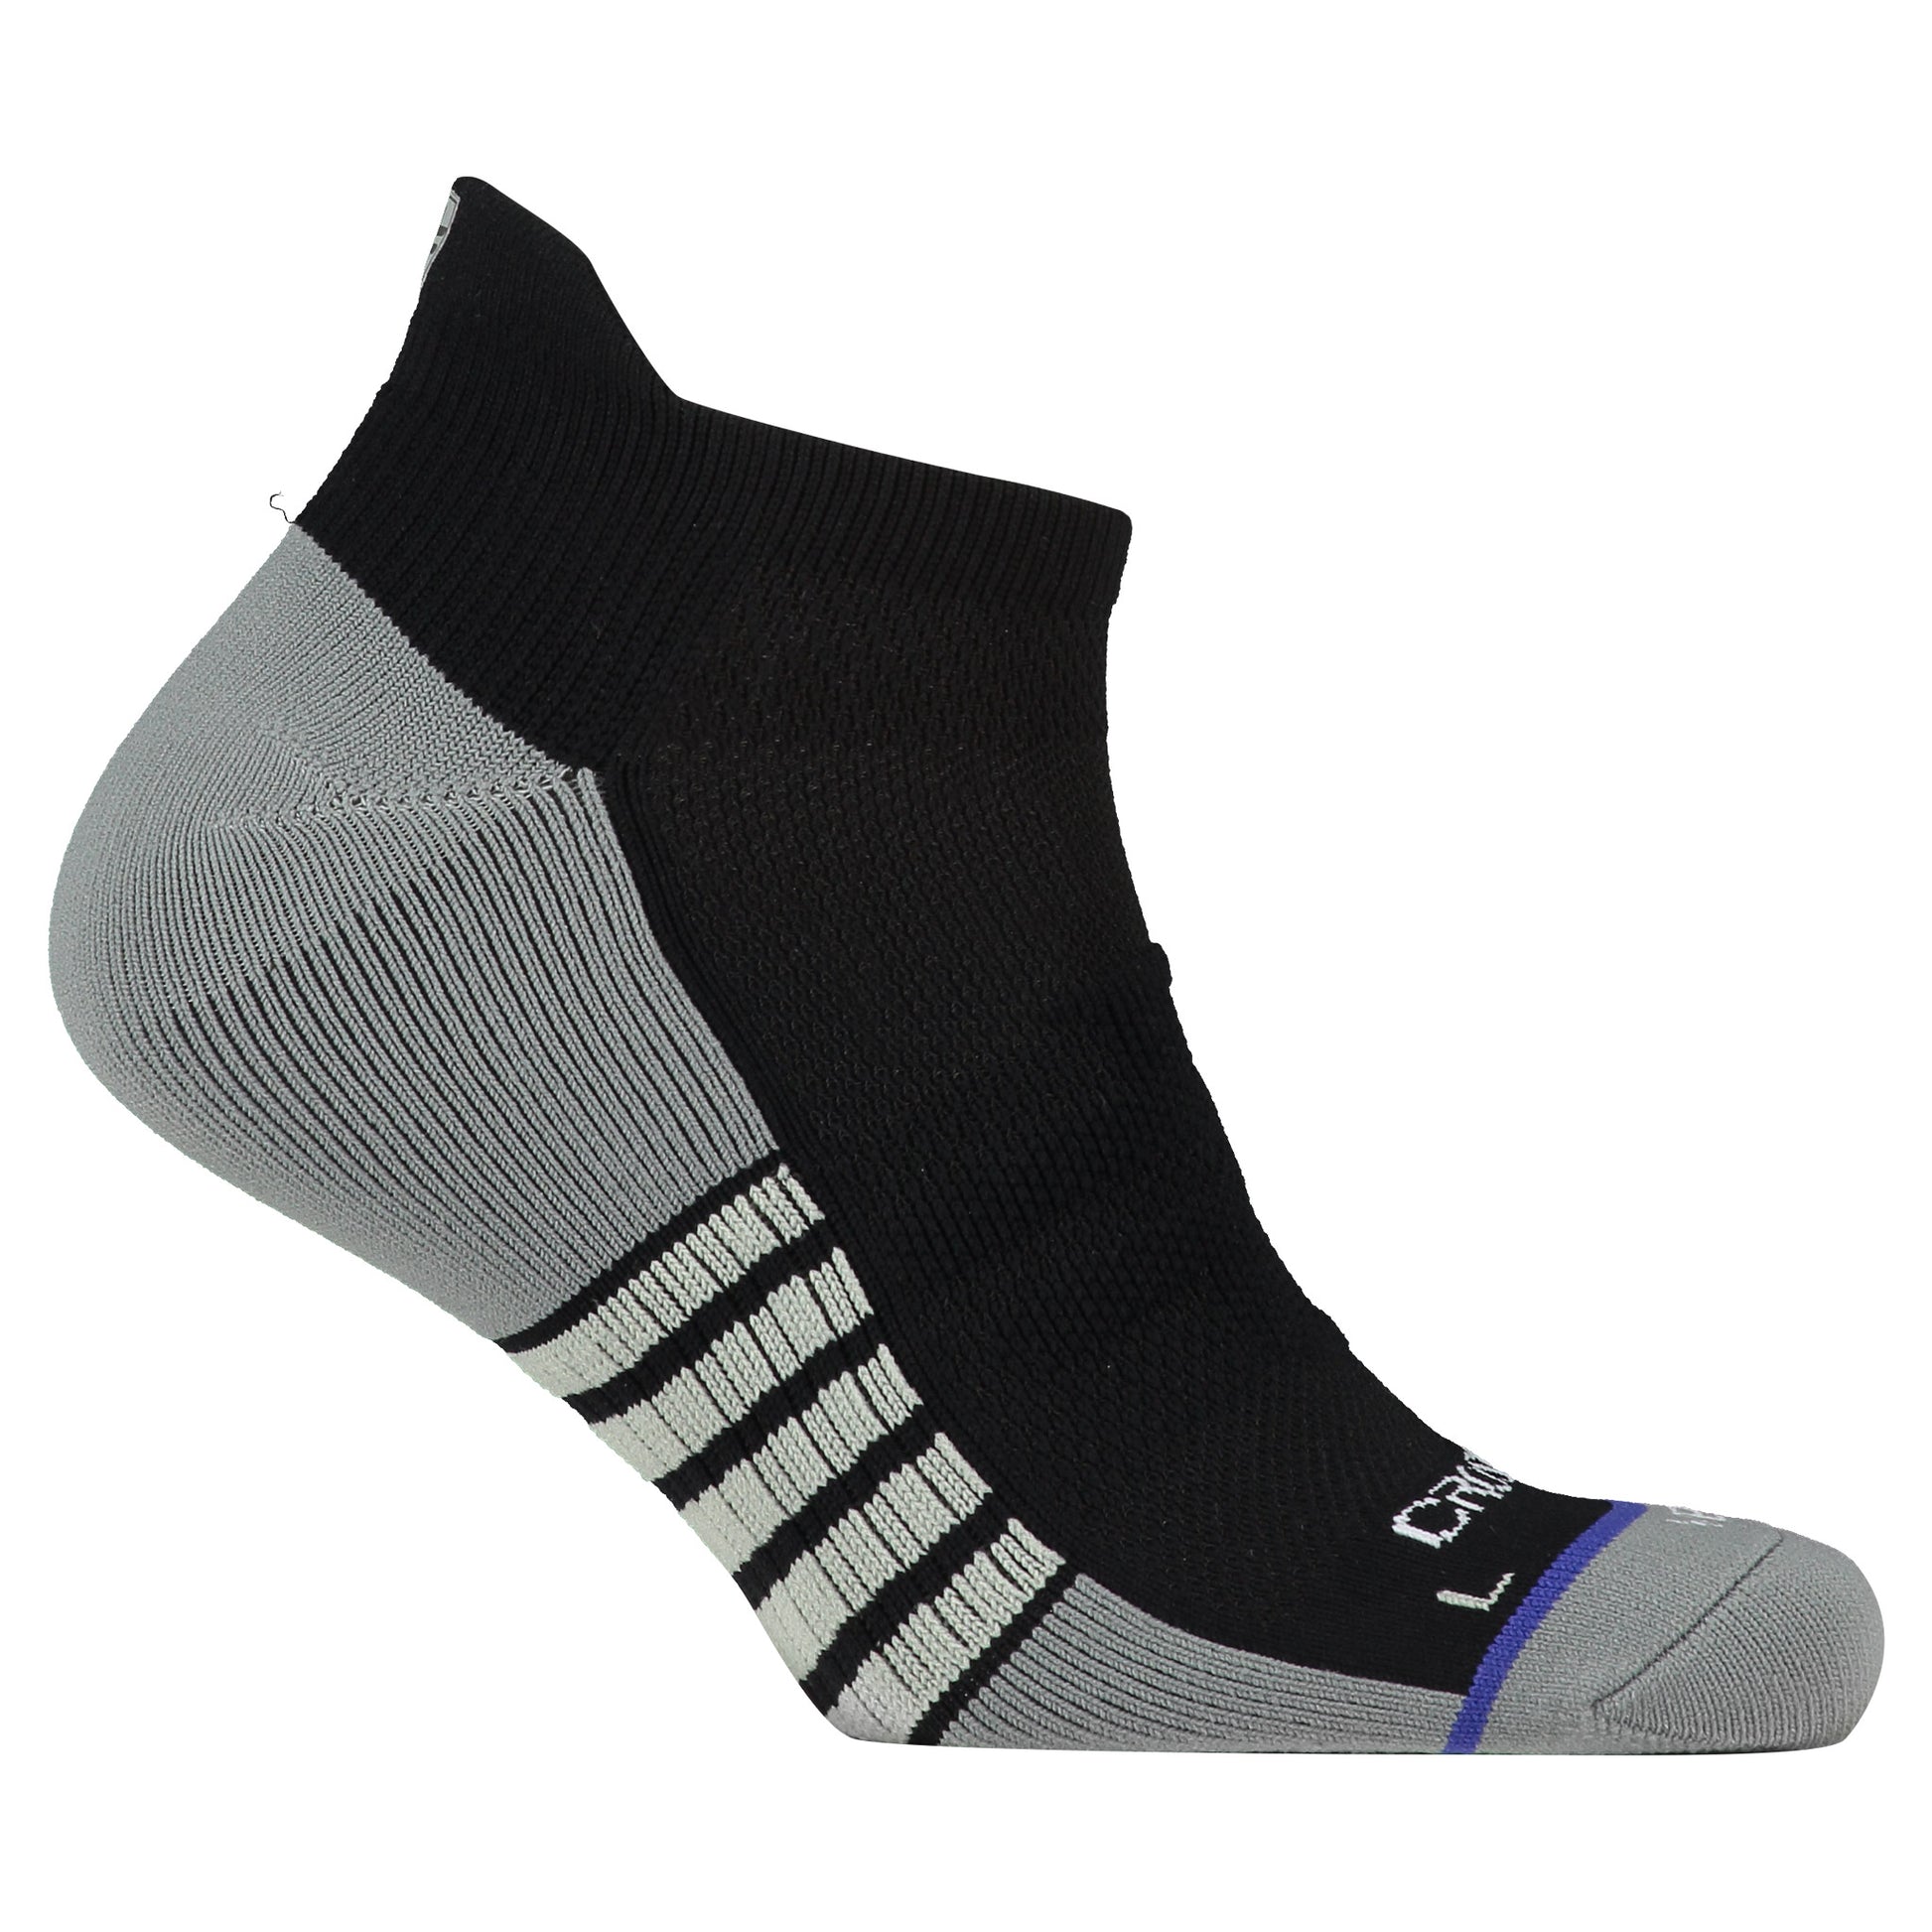 Crossfly men's Vent Low Socks in black / grey from the Performance series, featuring AirVent and AirBeams.